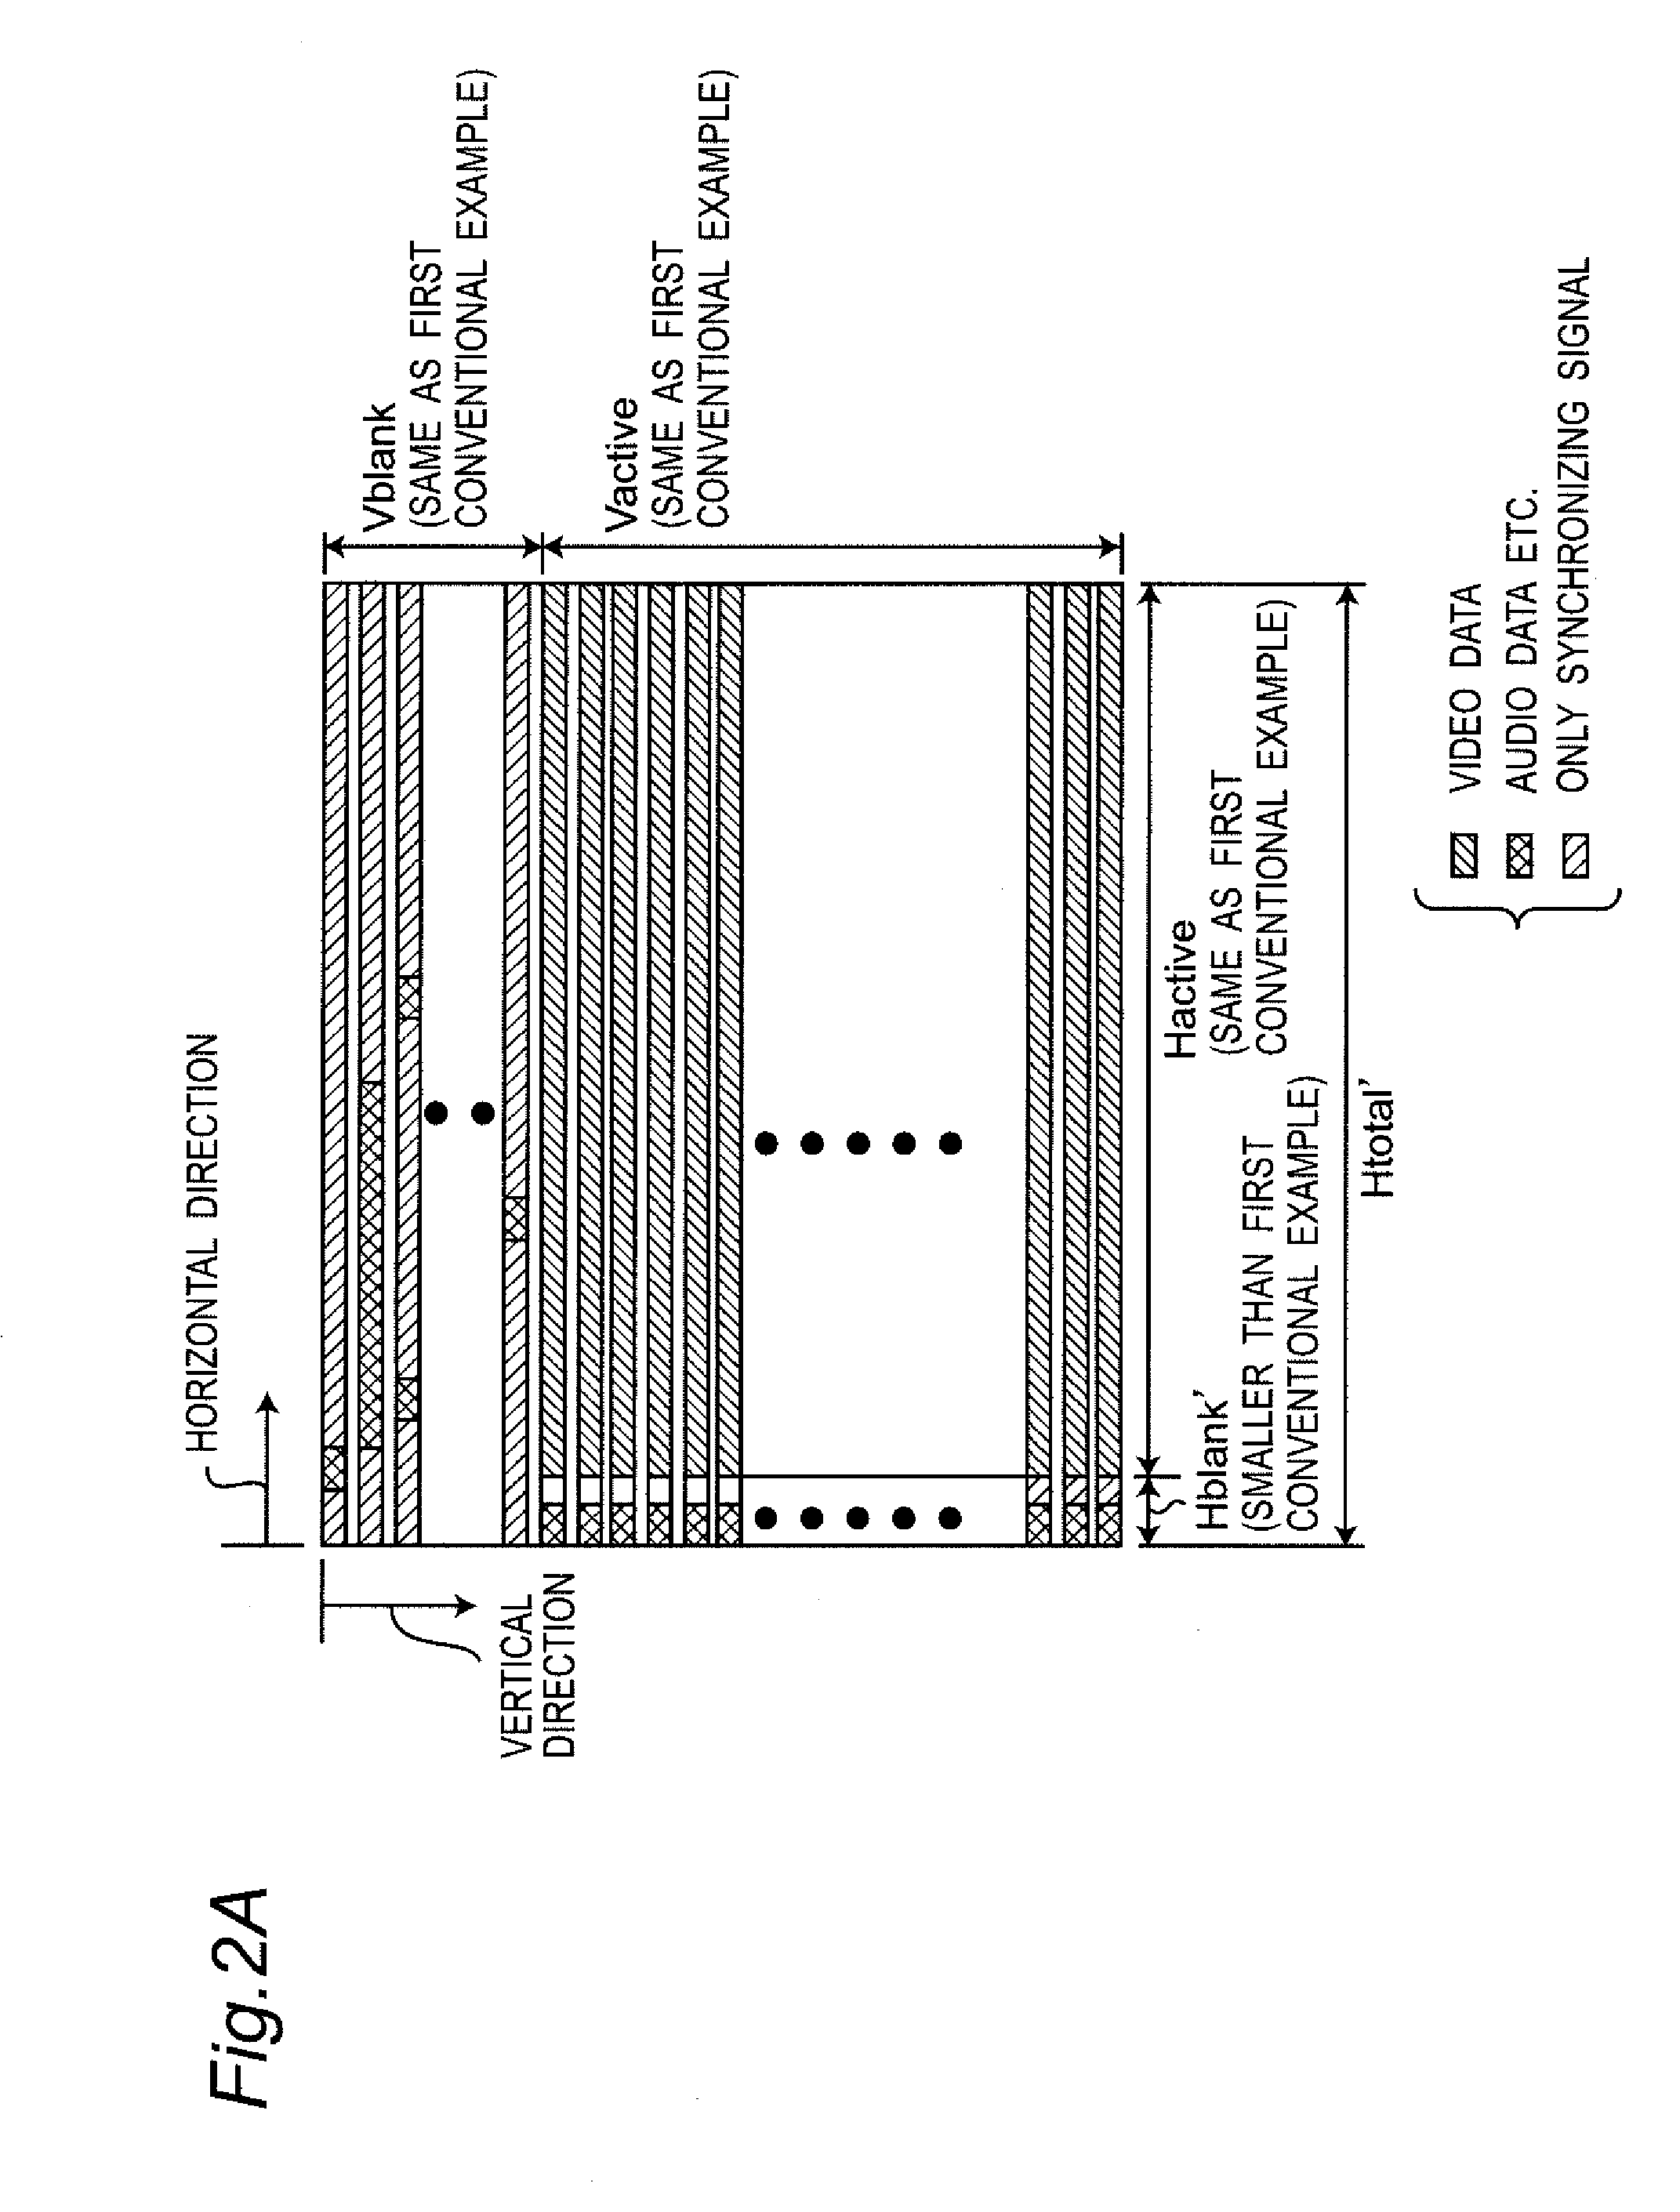 Video signal transmitter apparatus and receiver apparatus using uncompressed transmission system of video signal